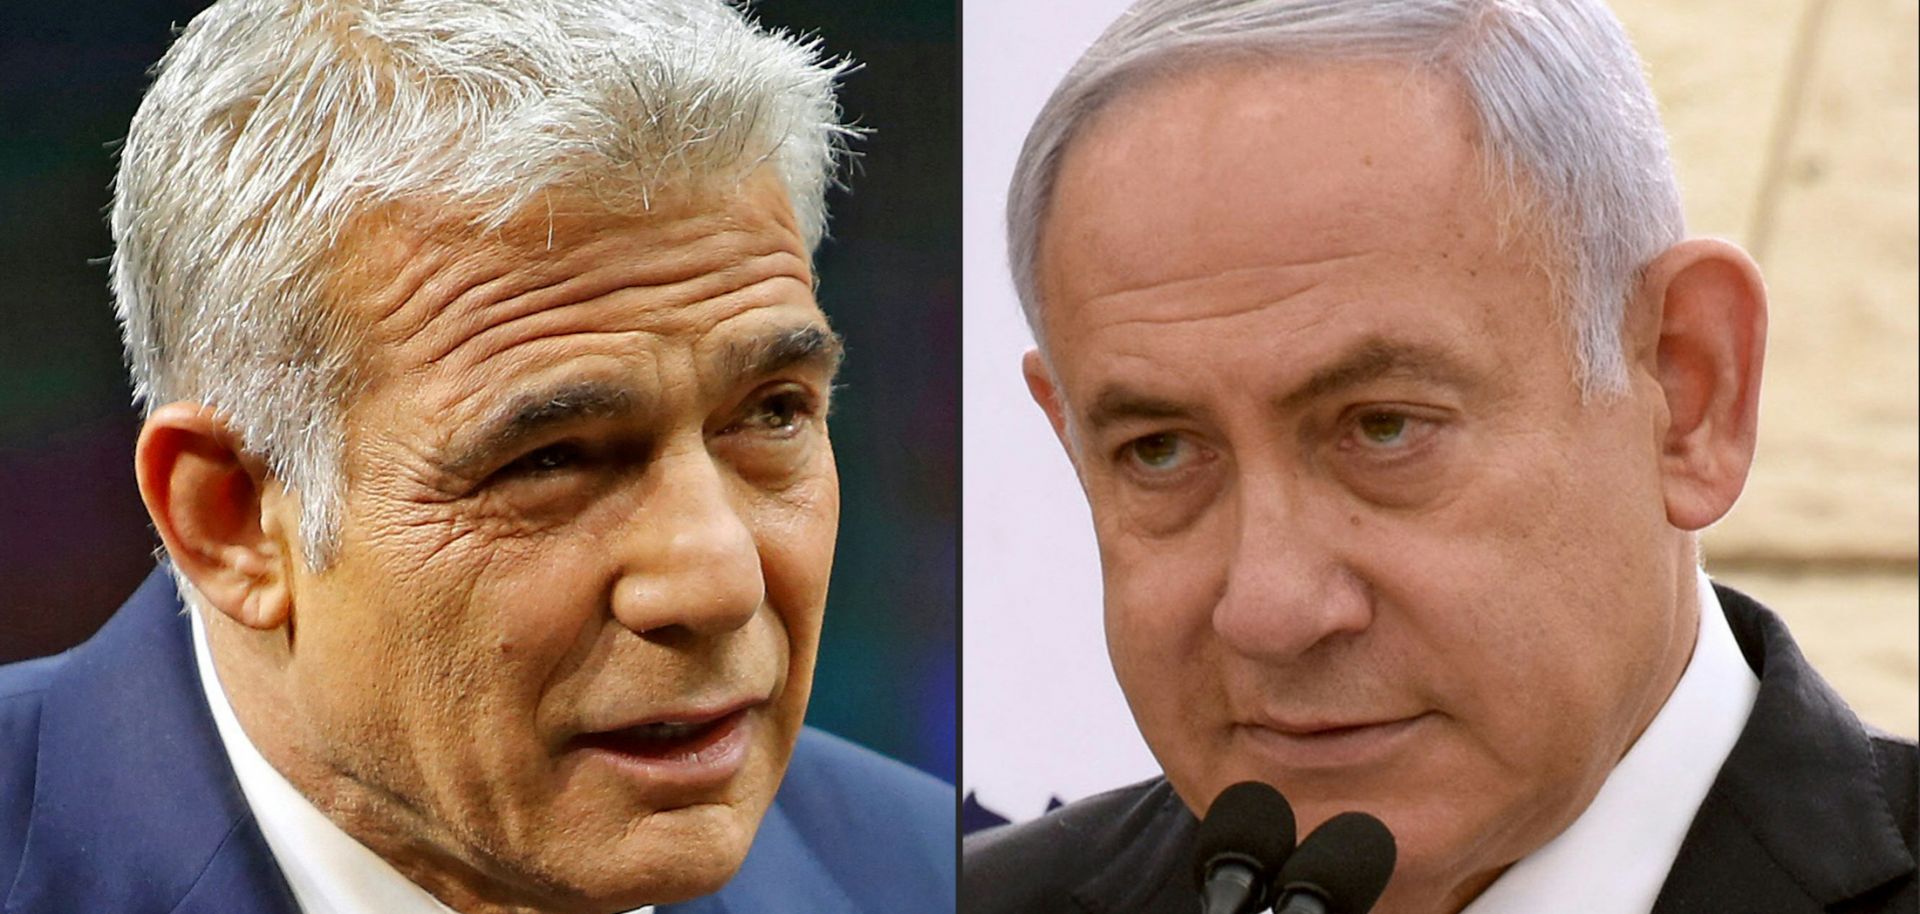 A photo combination shows the leader of Israel’s centrist Yesh Atid party, Yair Lapid (left), next to Israeli Prime Minister Benjamin Netanyahu of the Likud party.